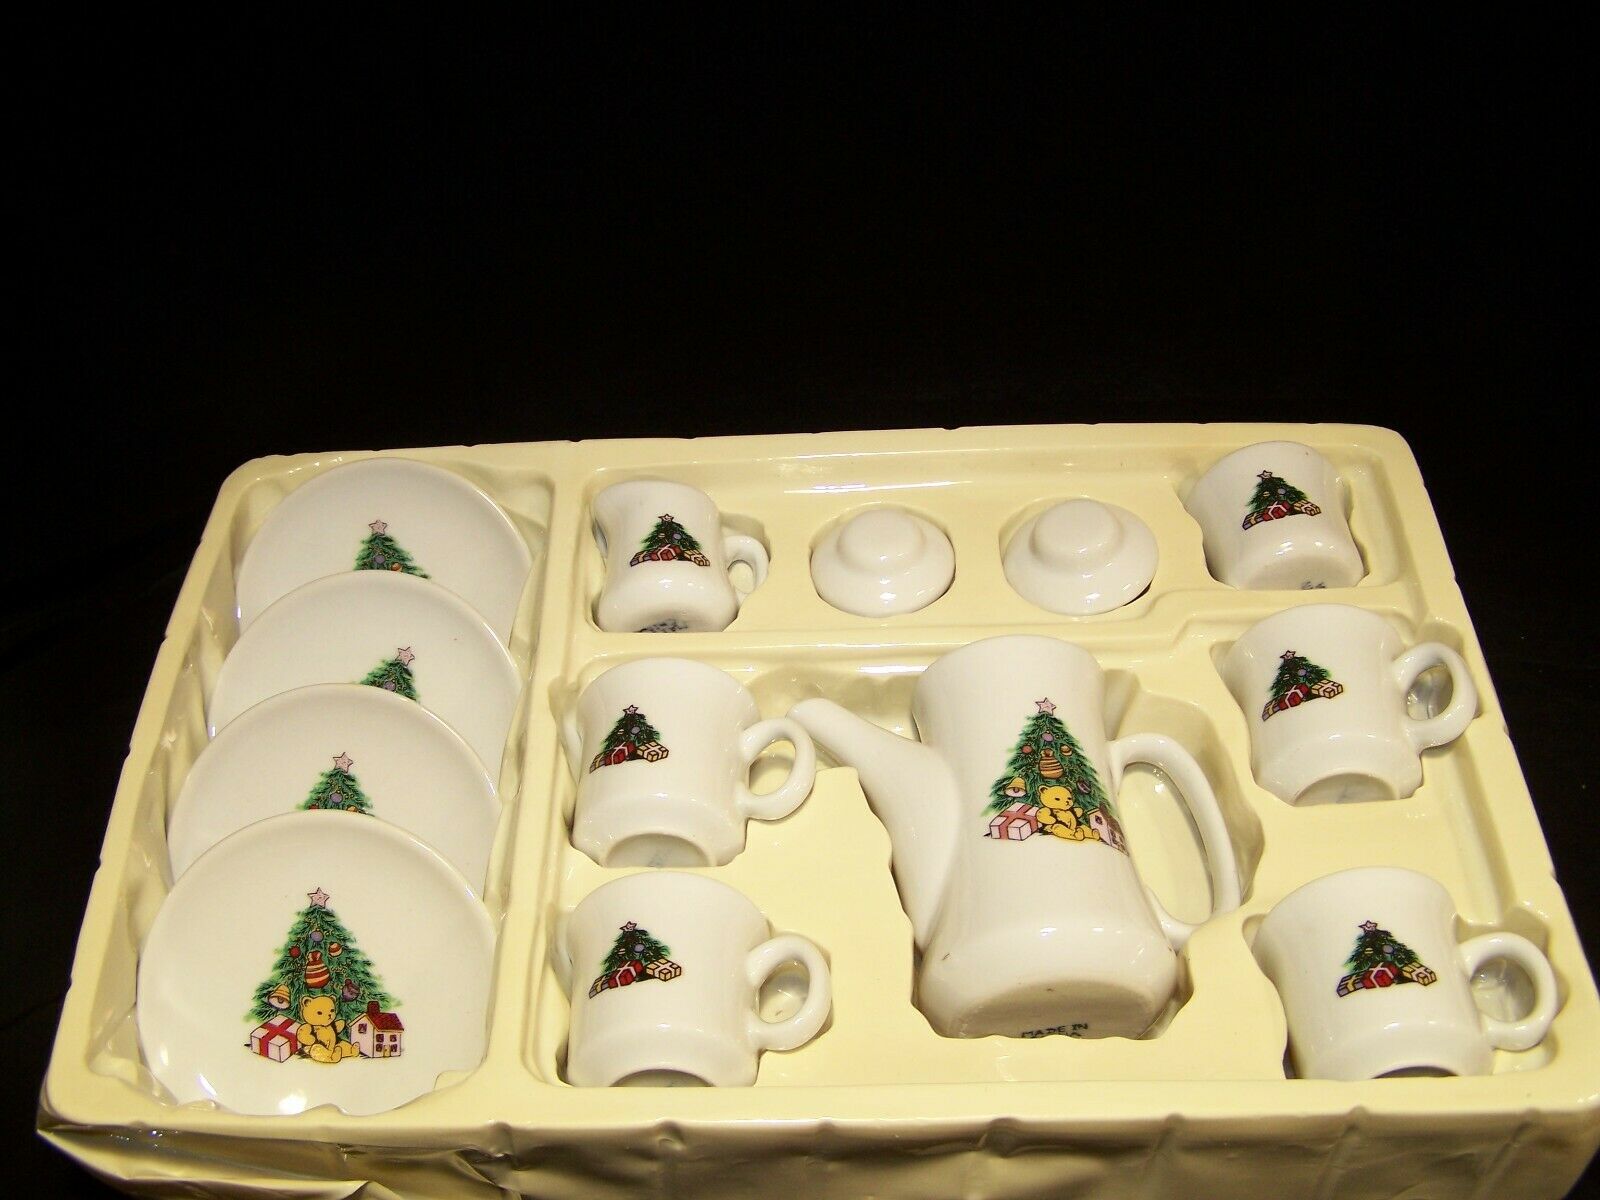 Vintage Childs China Tea Set; Christmas Tree With Bear, 13 Pieces New In Box